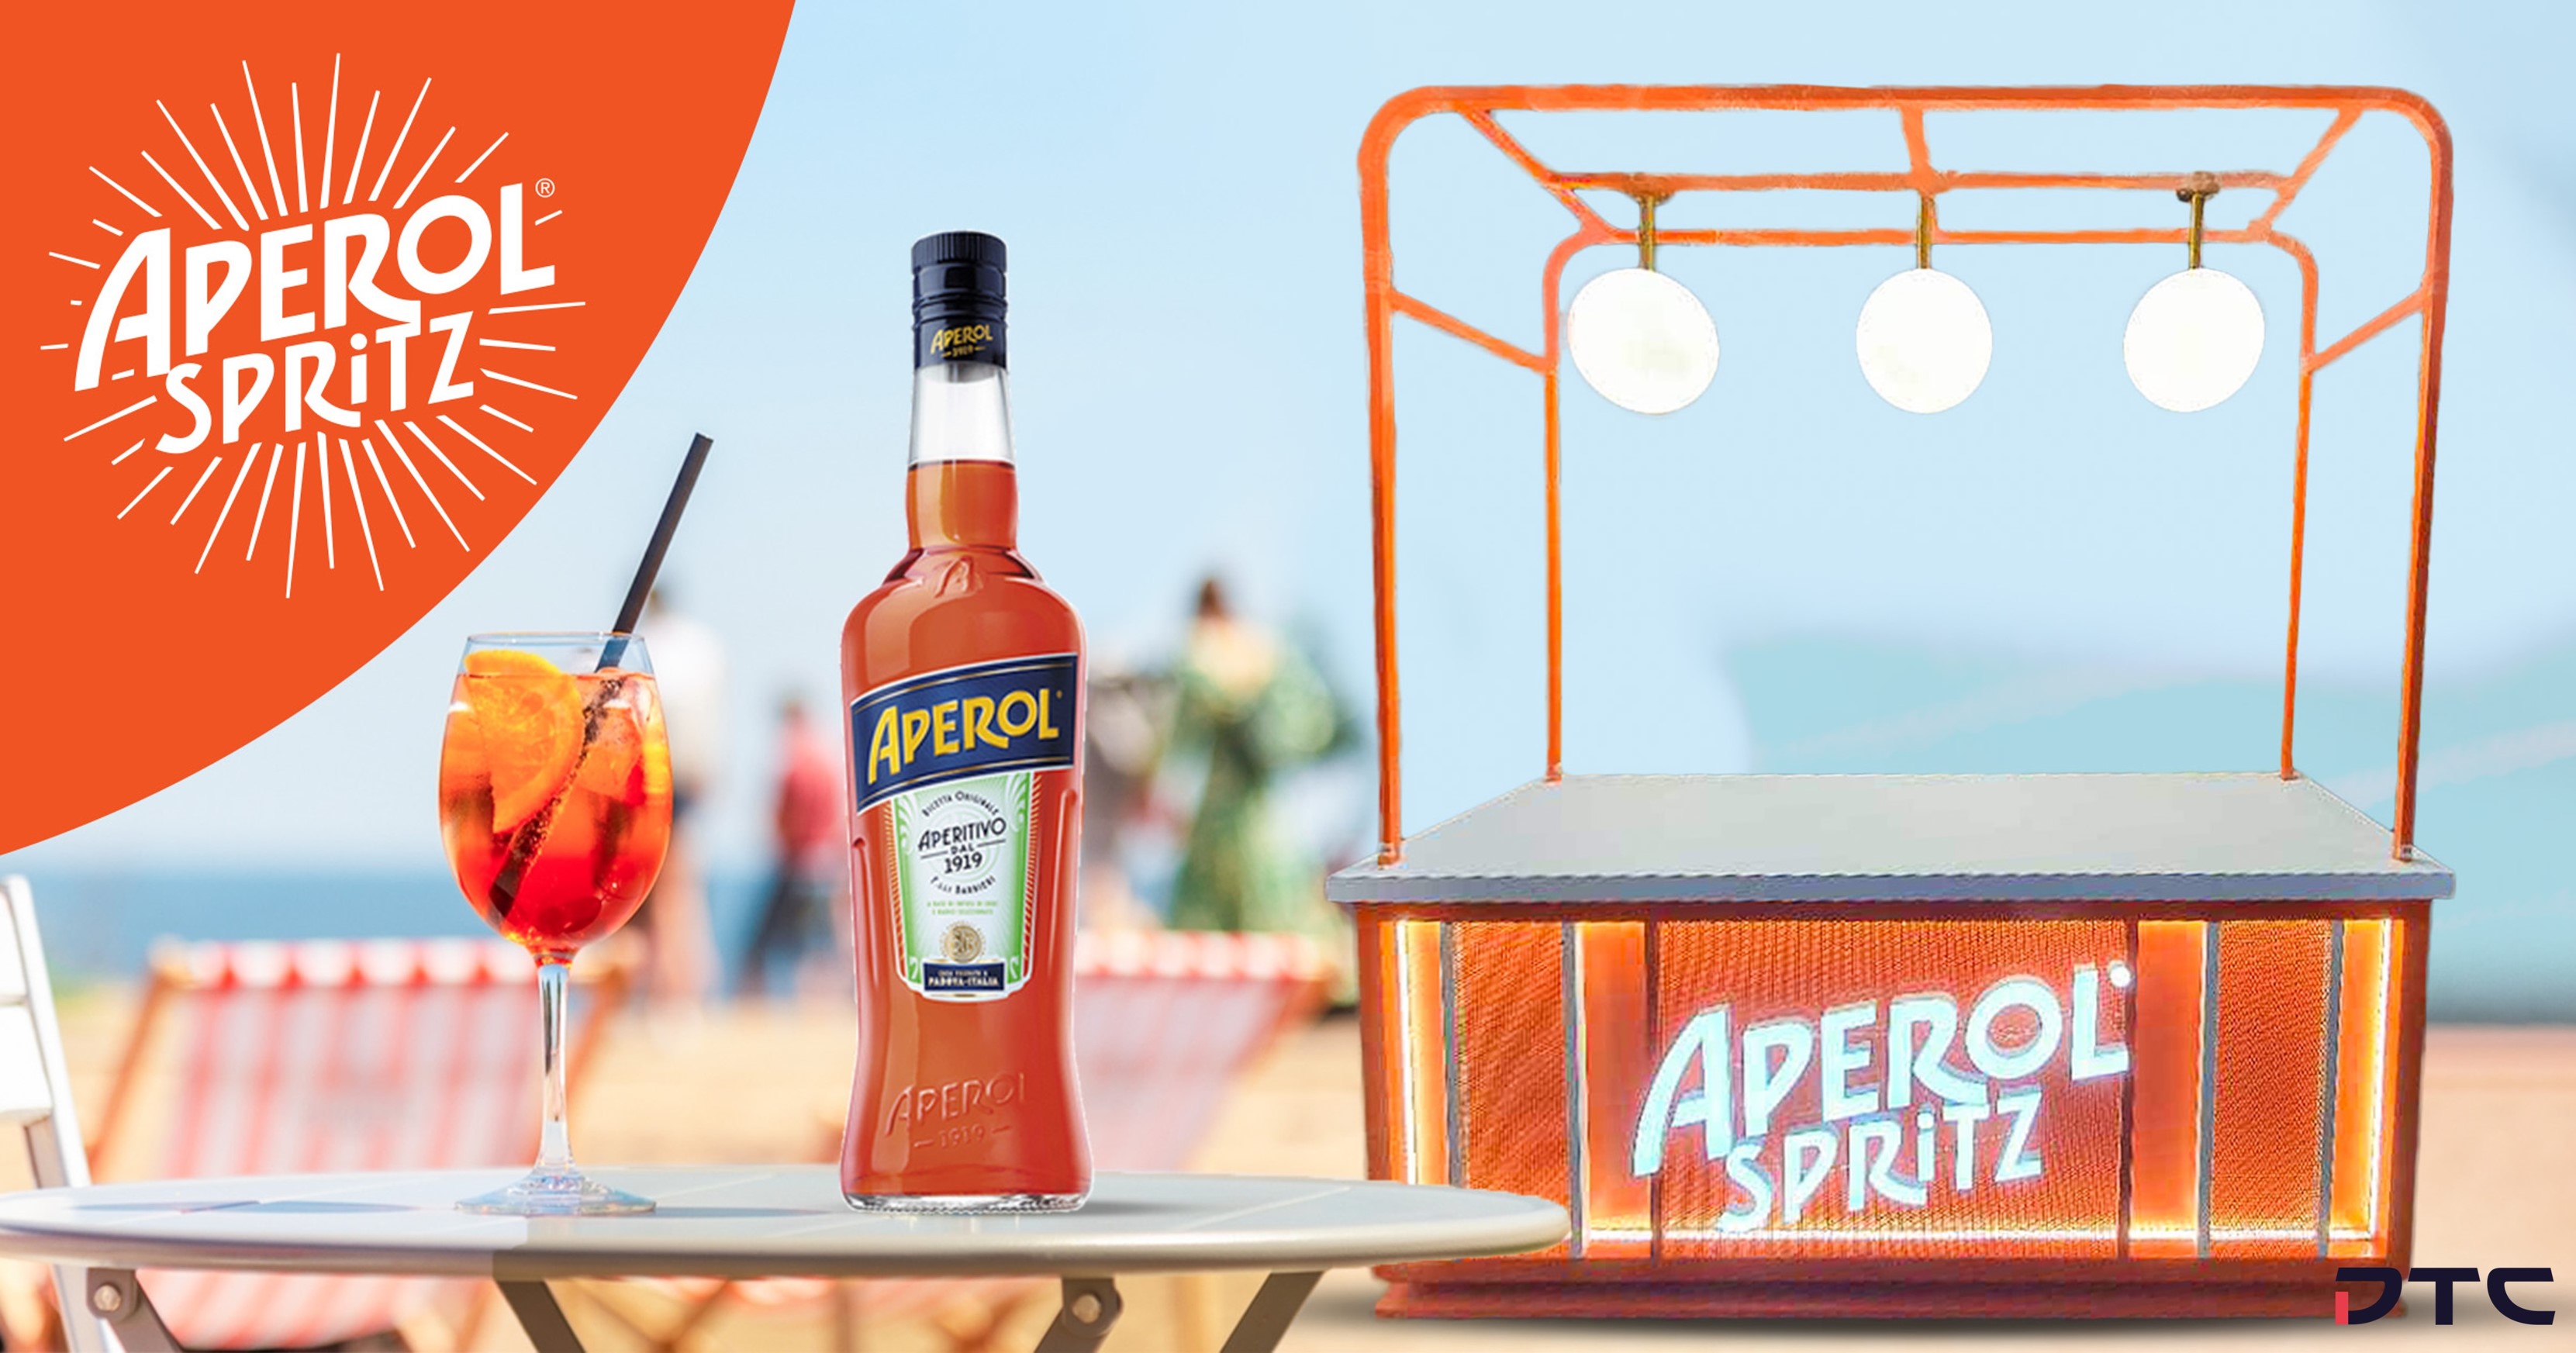 Aperol Spritz - Illuminating Brand Promotion with LED Display Counter